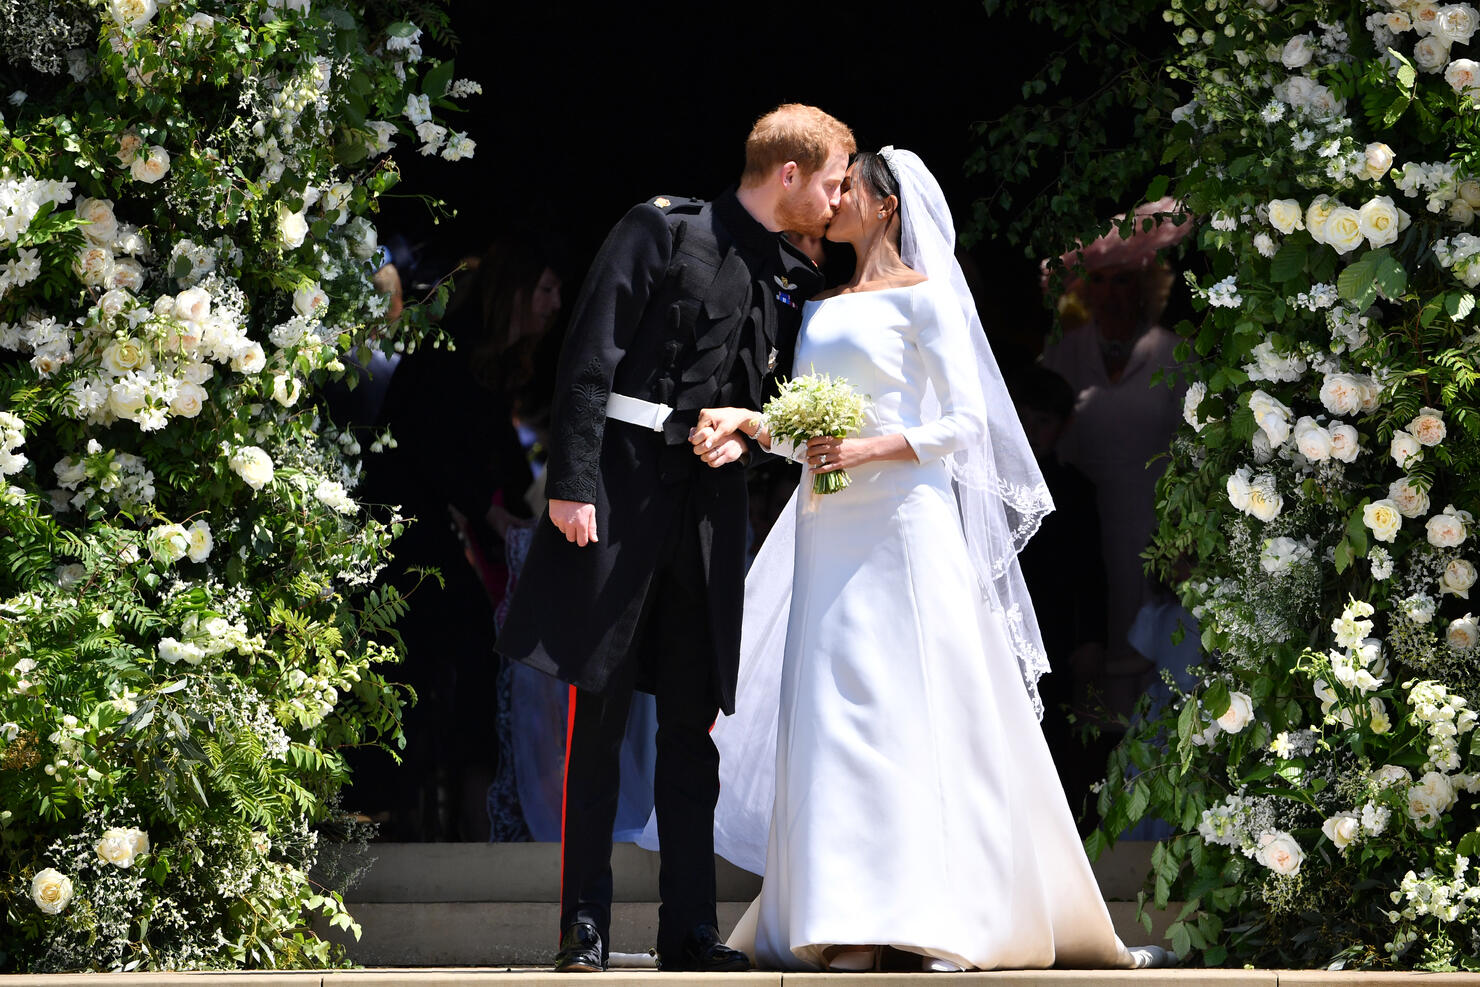 Royal Wedding one of the biggest news stories of 2018